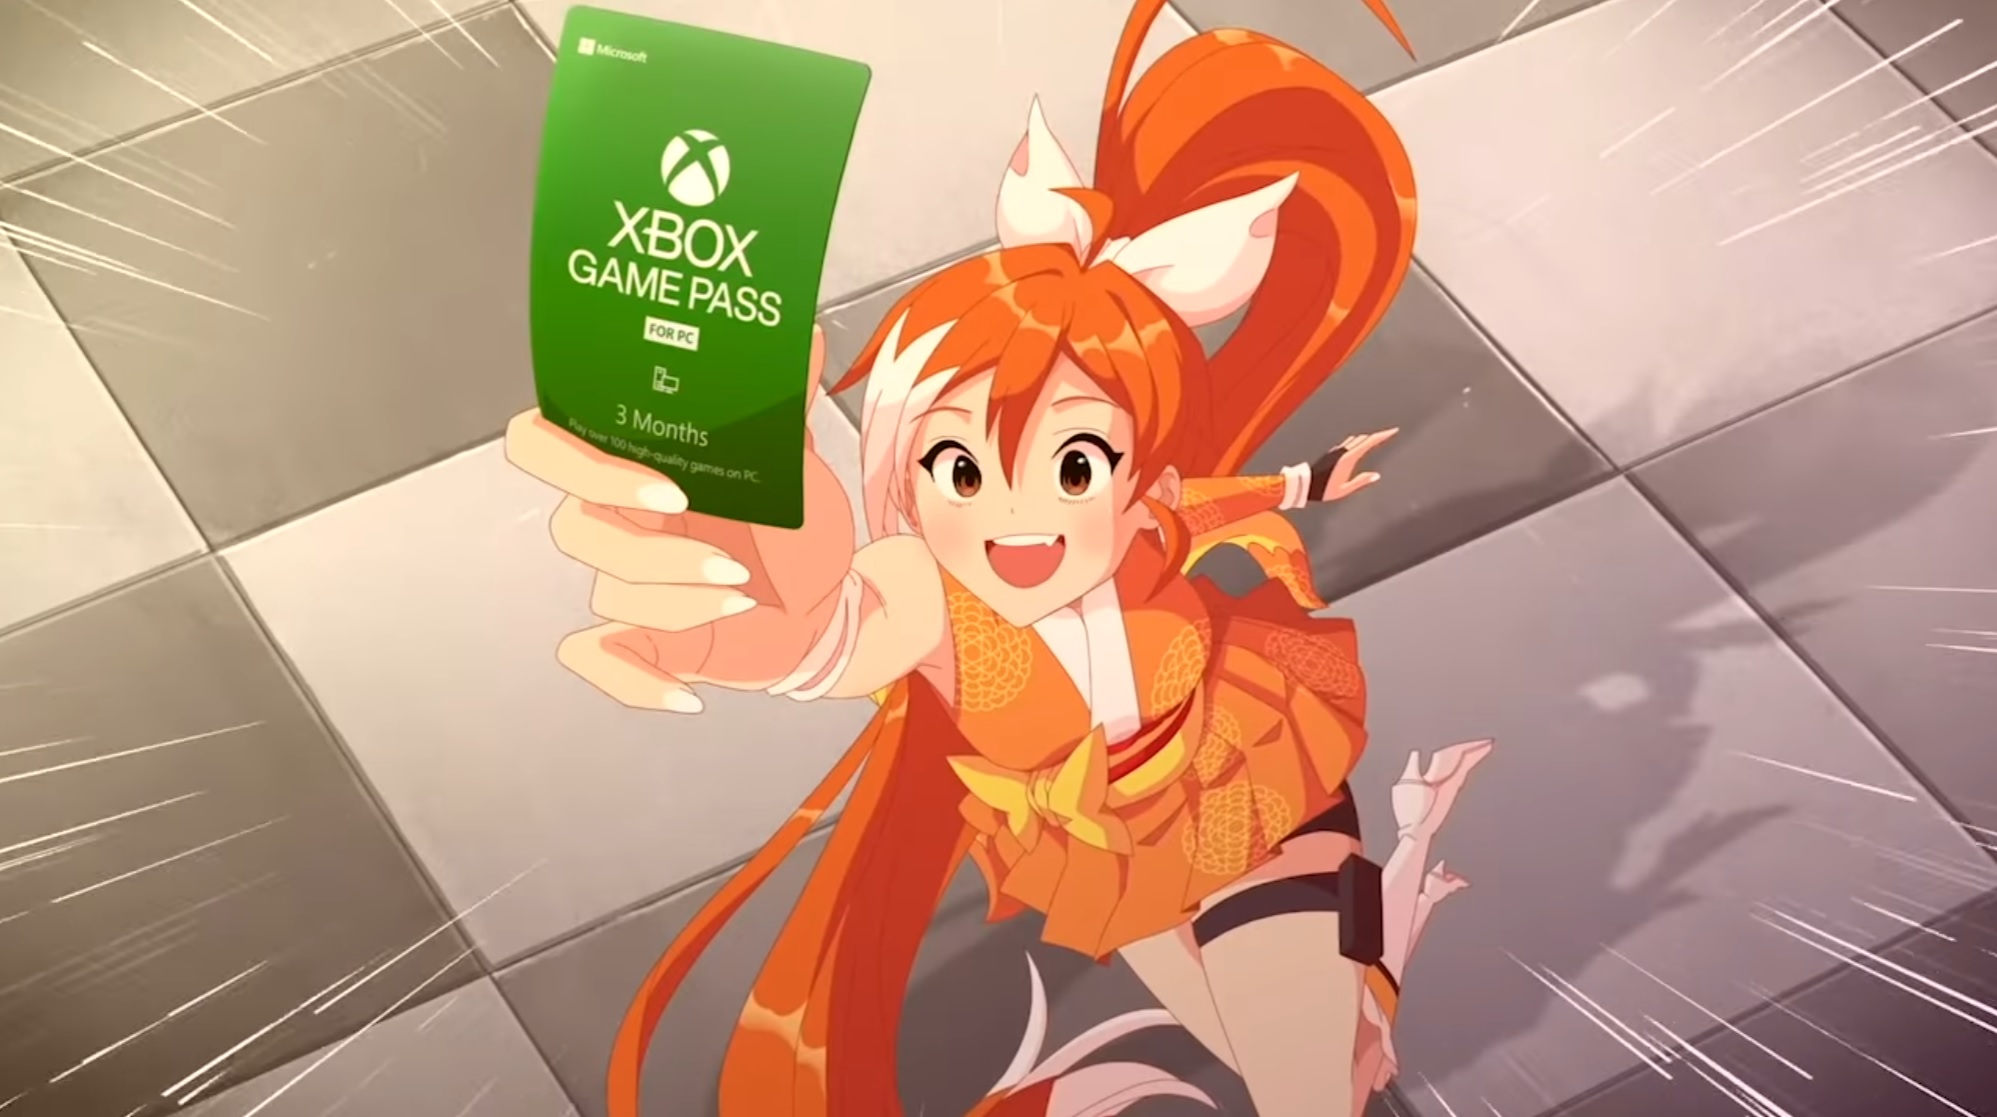 Get Three Months Of Xbox Game Pass Pc For Free With Anime Platform Crunchyroll Gamesradar